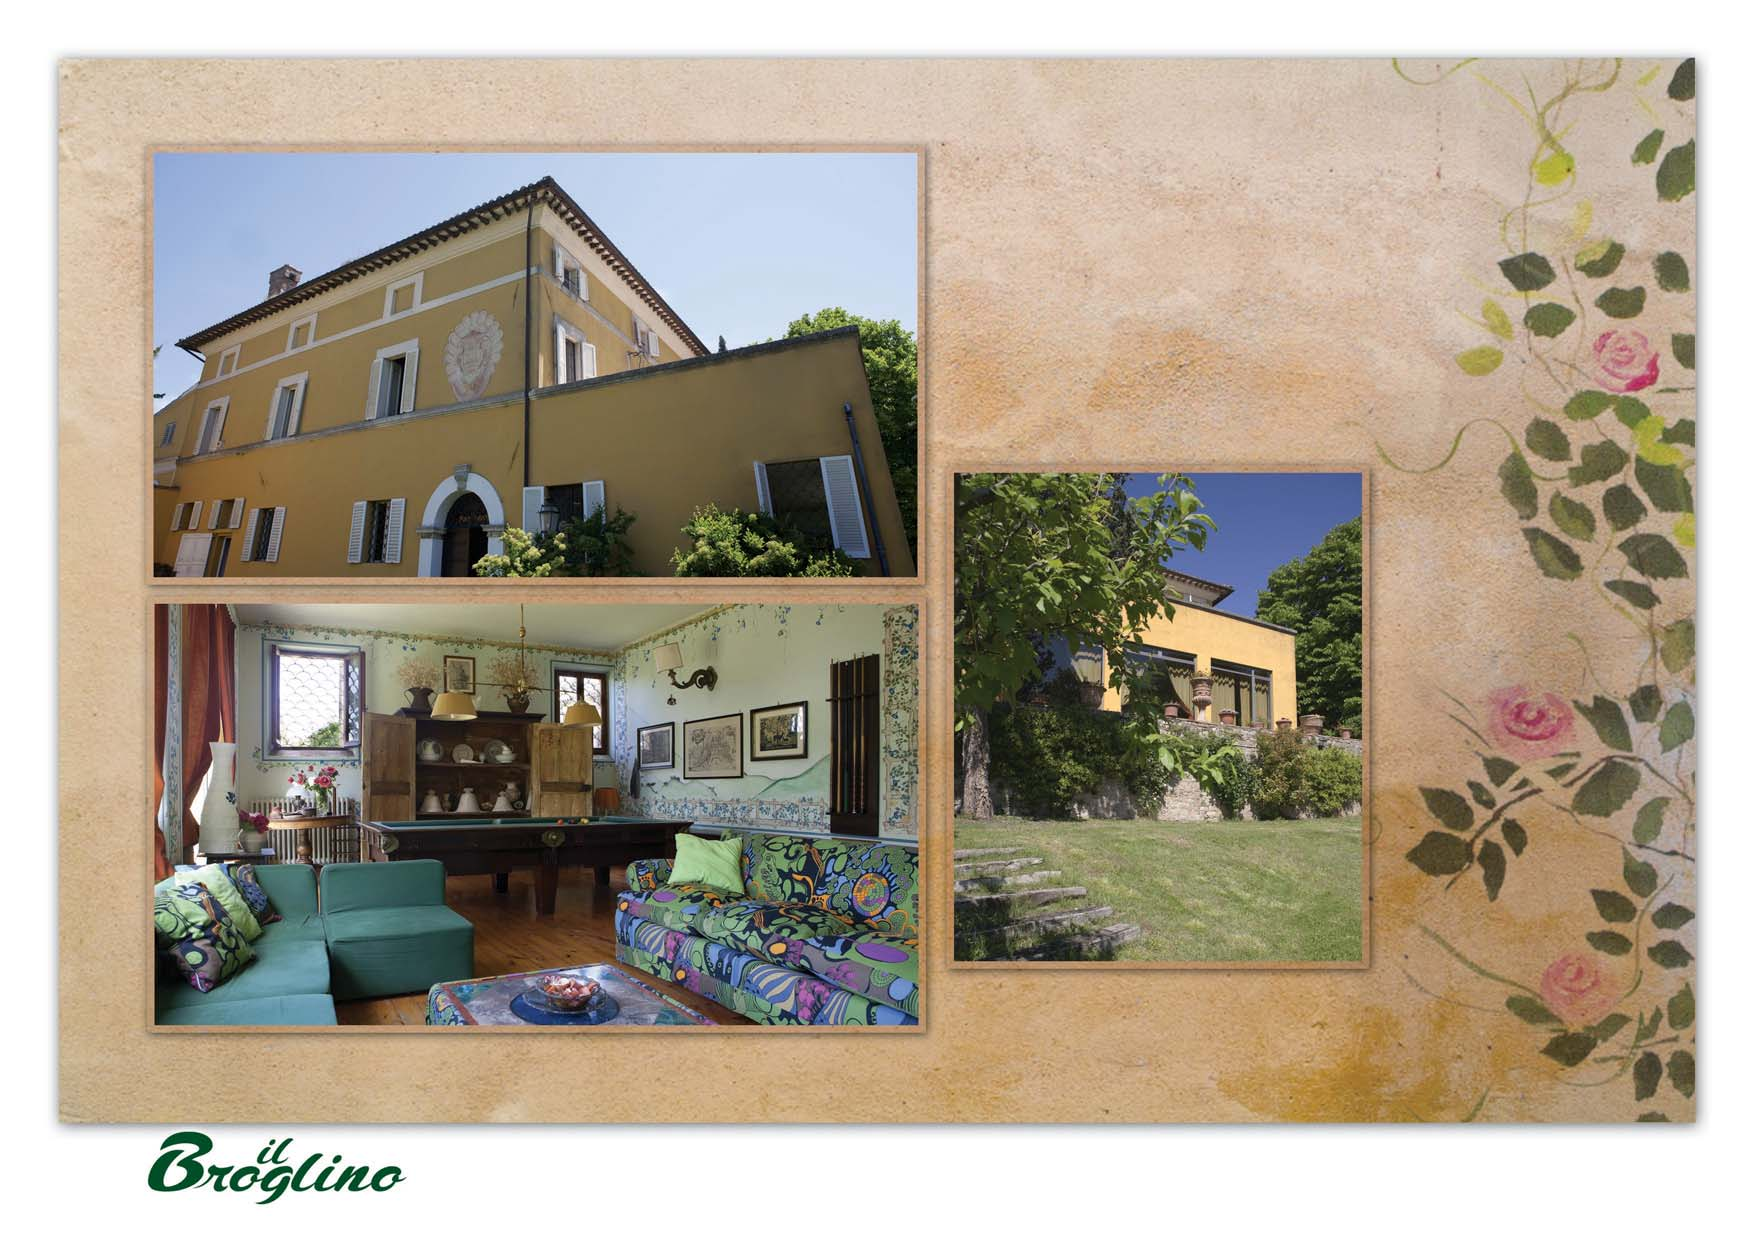 Il Broglino, with its history, is a part of the Italian heritage and art history.